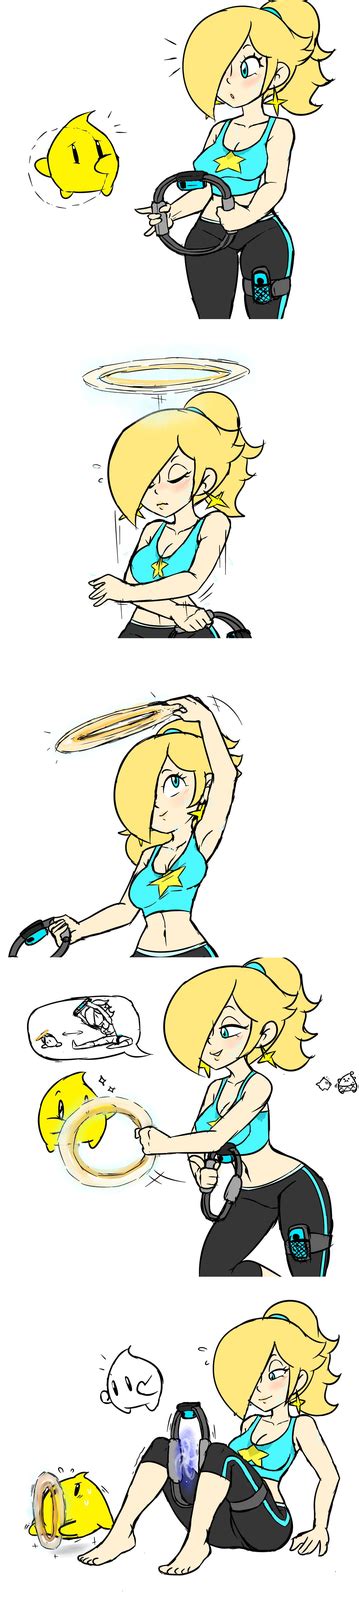 Yoga Practice With Rosalina And Samus In 2020 Super